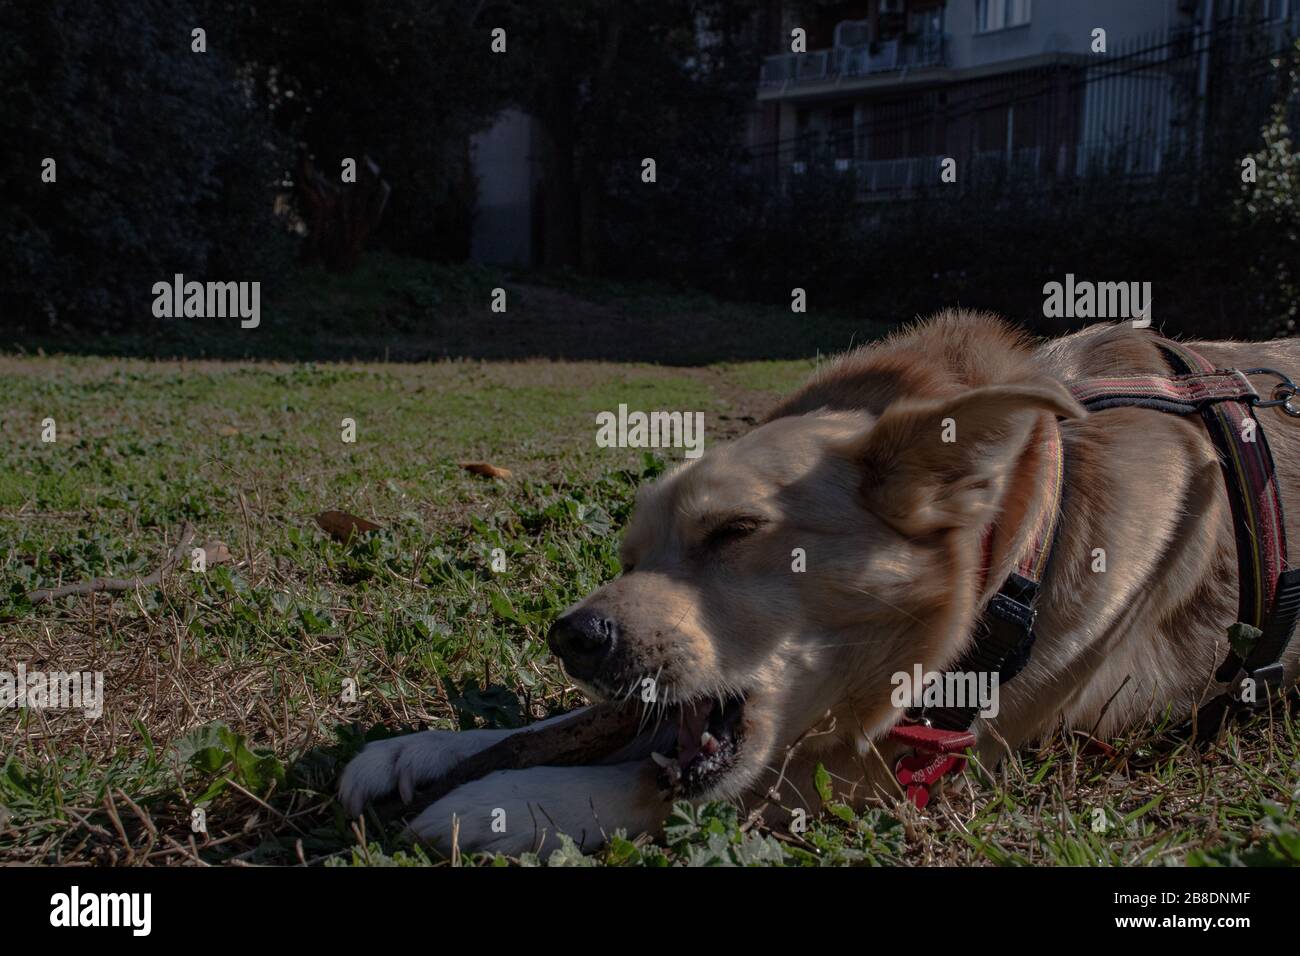 Rome Italy. A half-breed dog plays free at the park, chases the ball, grabs it and brings it back. Stock Photo